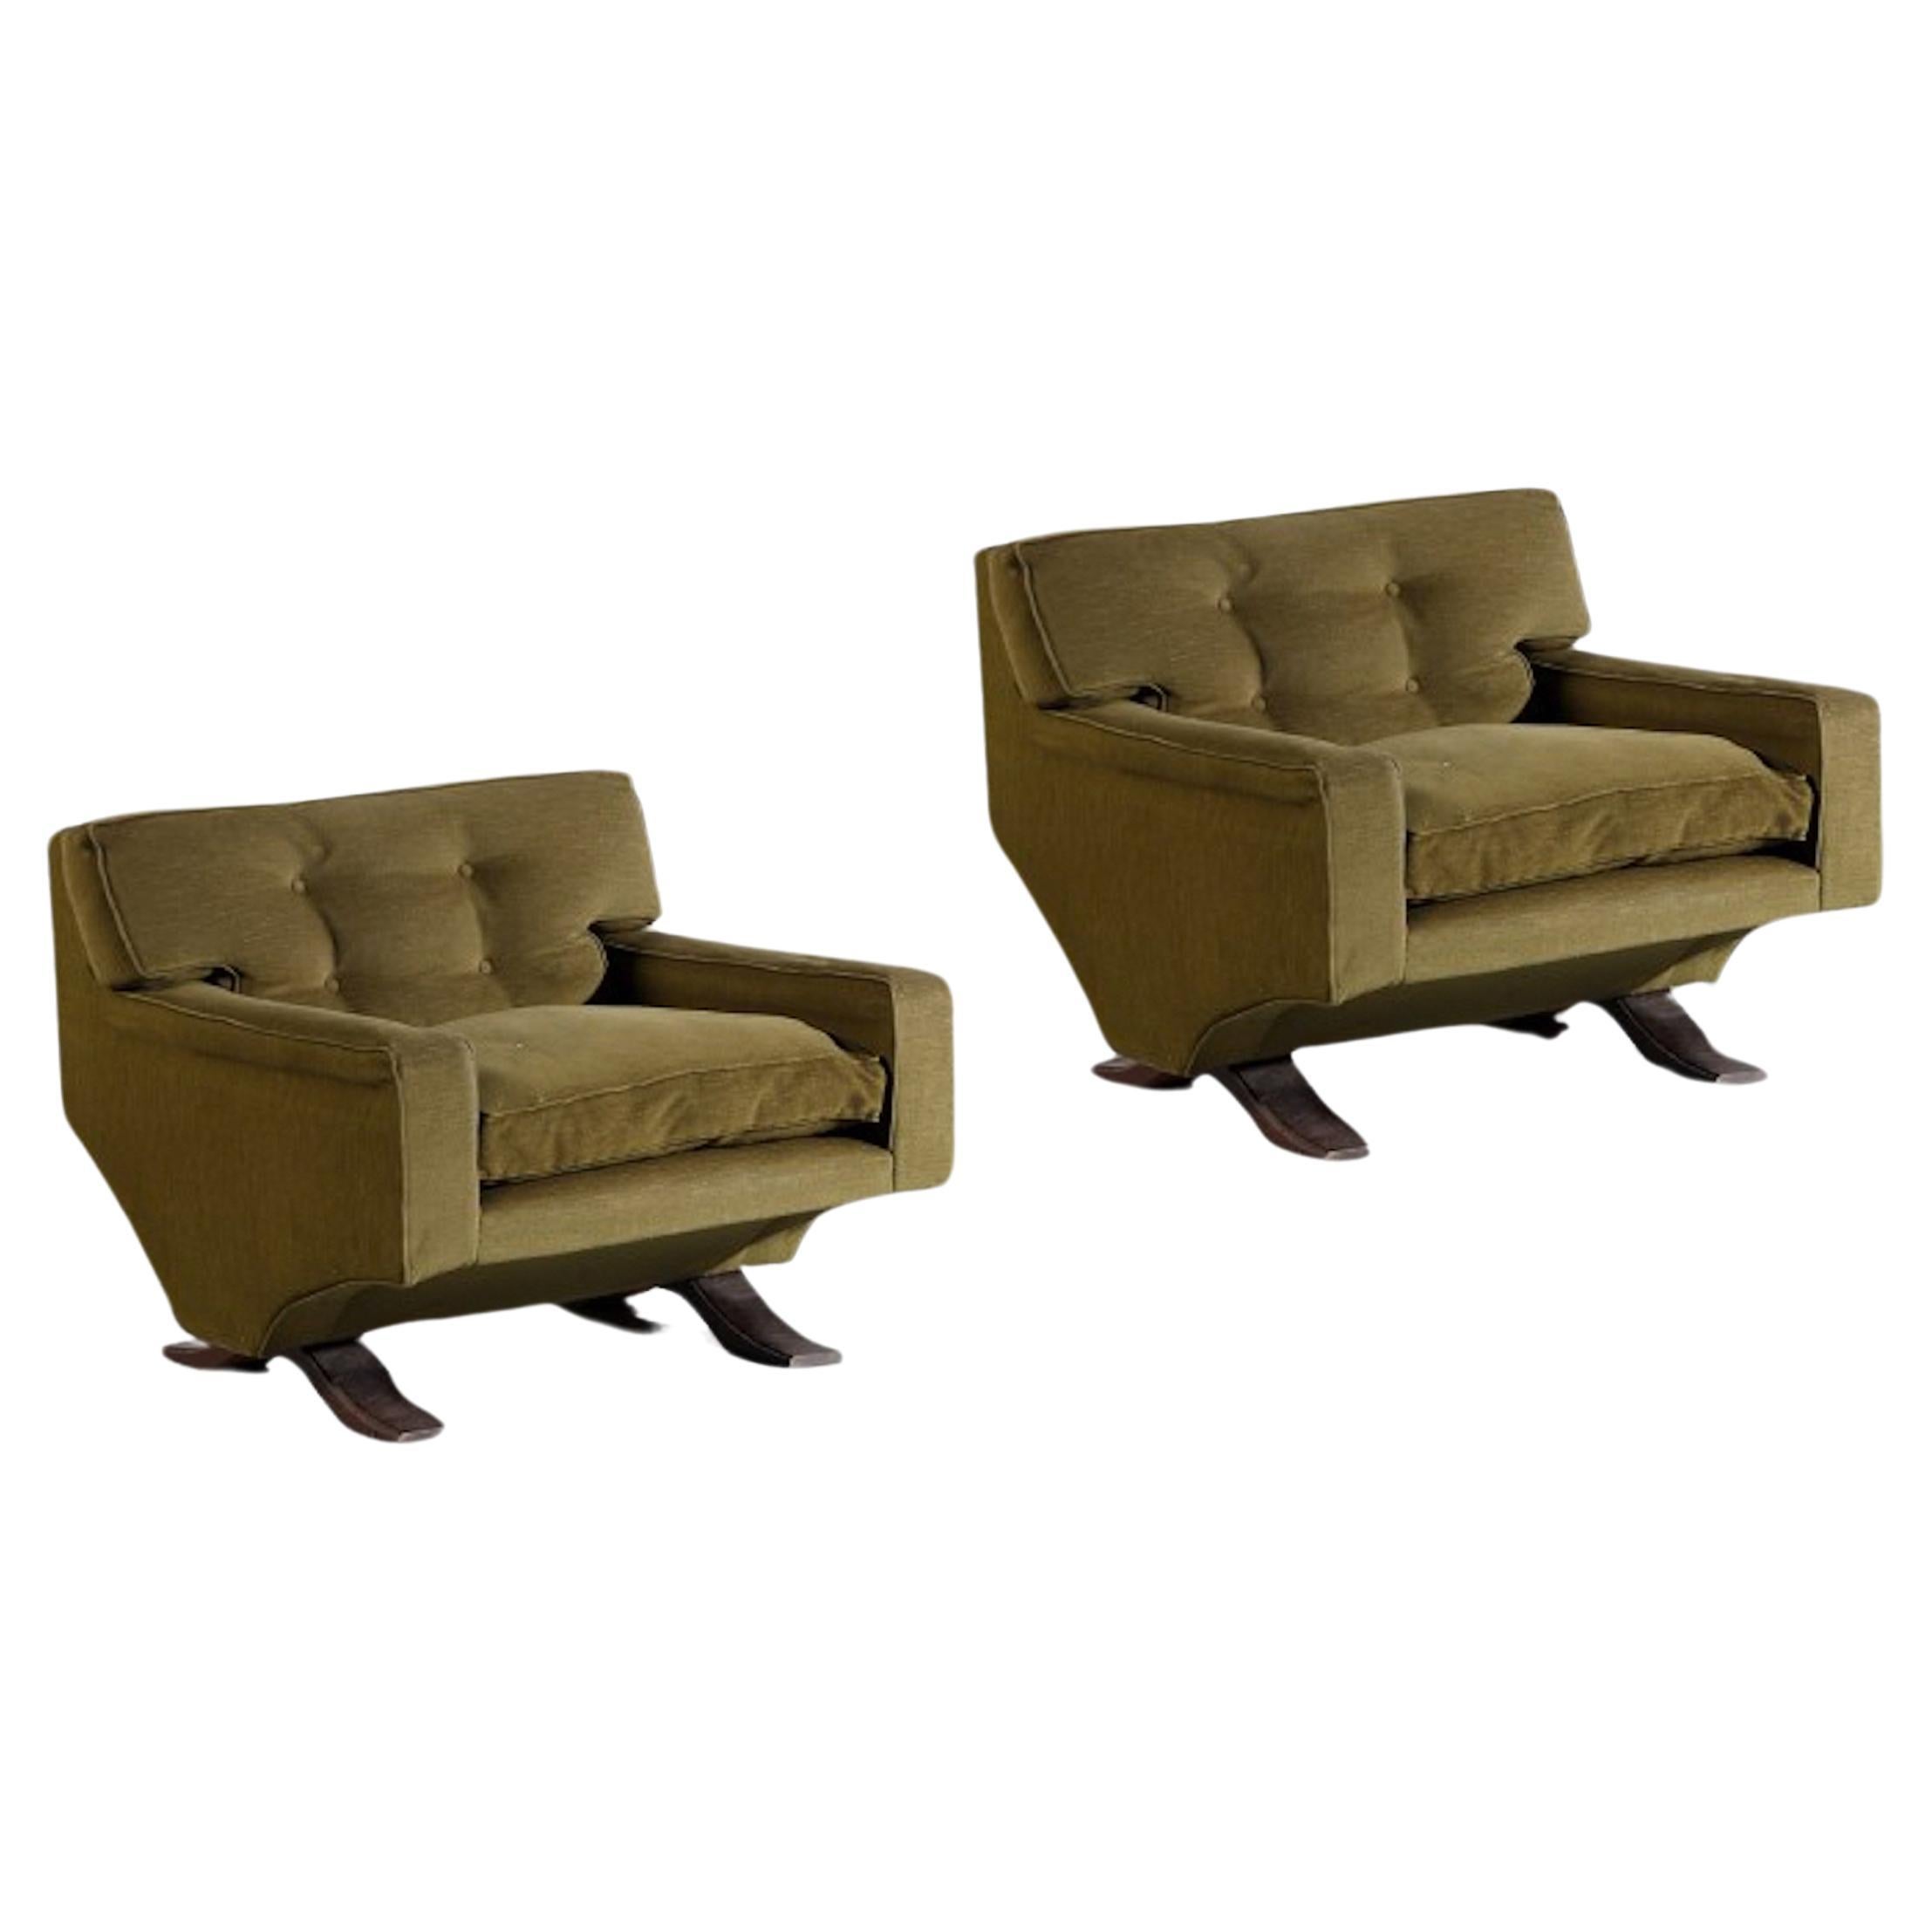 Pair of Italian Armchairs by Franz Sartori for Flexform, 1965 (Customizable) For Sale